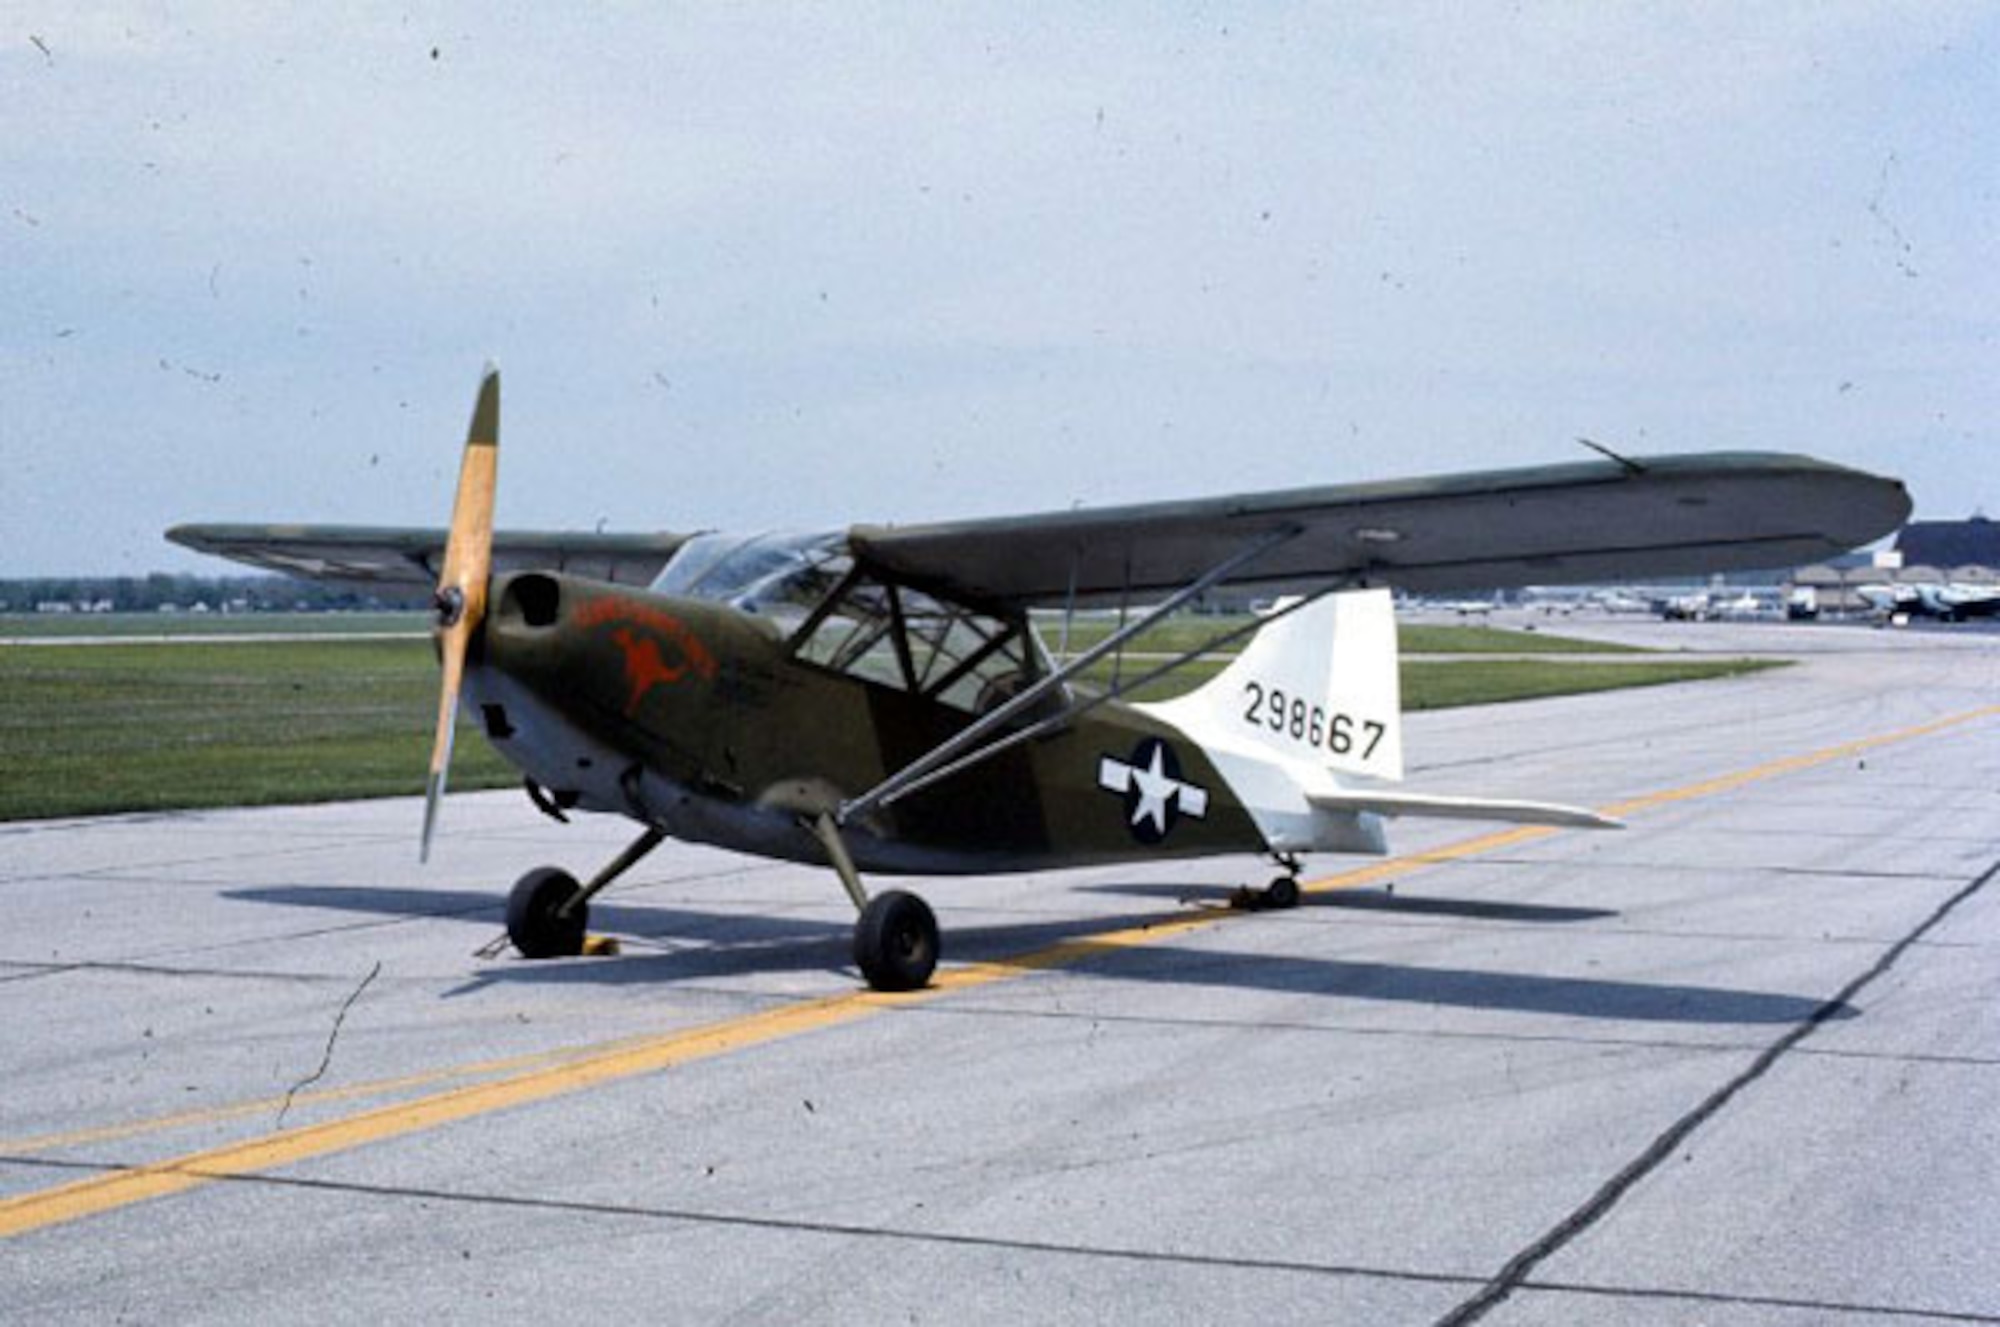 The Stinson L-5 Sentinel was flown by the 112th Liaison Squadron in the Oregon Maneuver of 1943.  The squadron deployed overseas to Europe in 1944 and served in a courier role in the area behind the front lines during the campaign across Northwestern Europe, principally attached to Headquarters Command, Supreme Headquarters Allied Expeditionary Forces.  This L-5 Sentinel is pictured at the National Museum of the Air Force, Wright-Patterson AFB, Ohio.  (U.S. Air Force Photo)